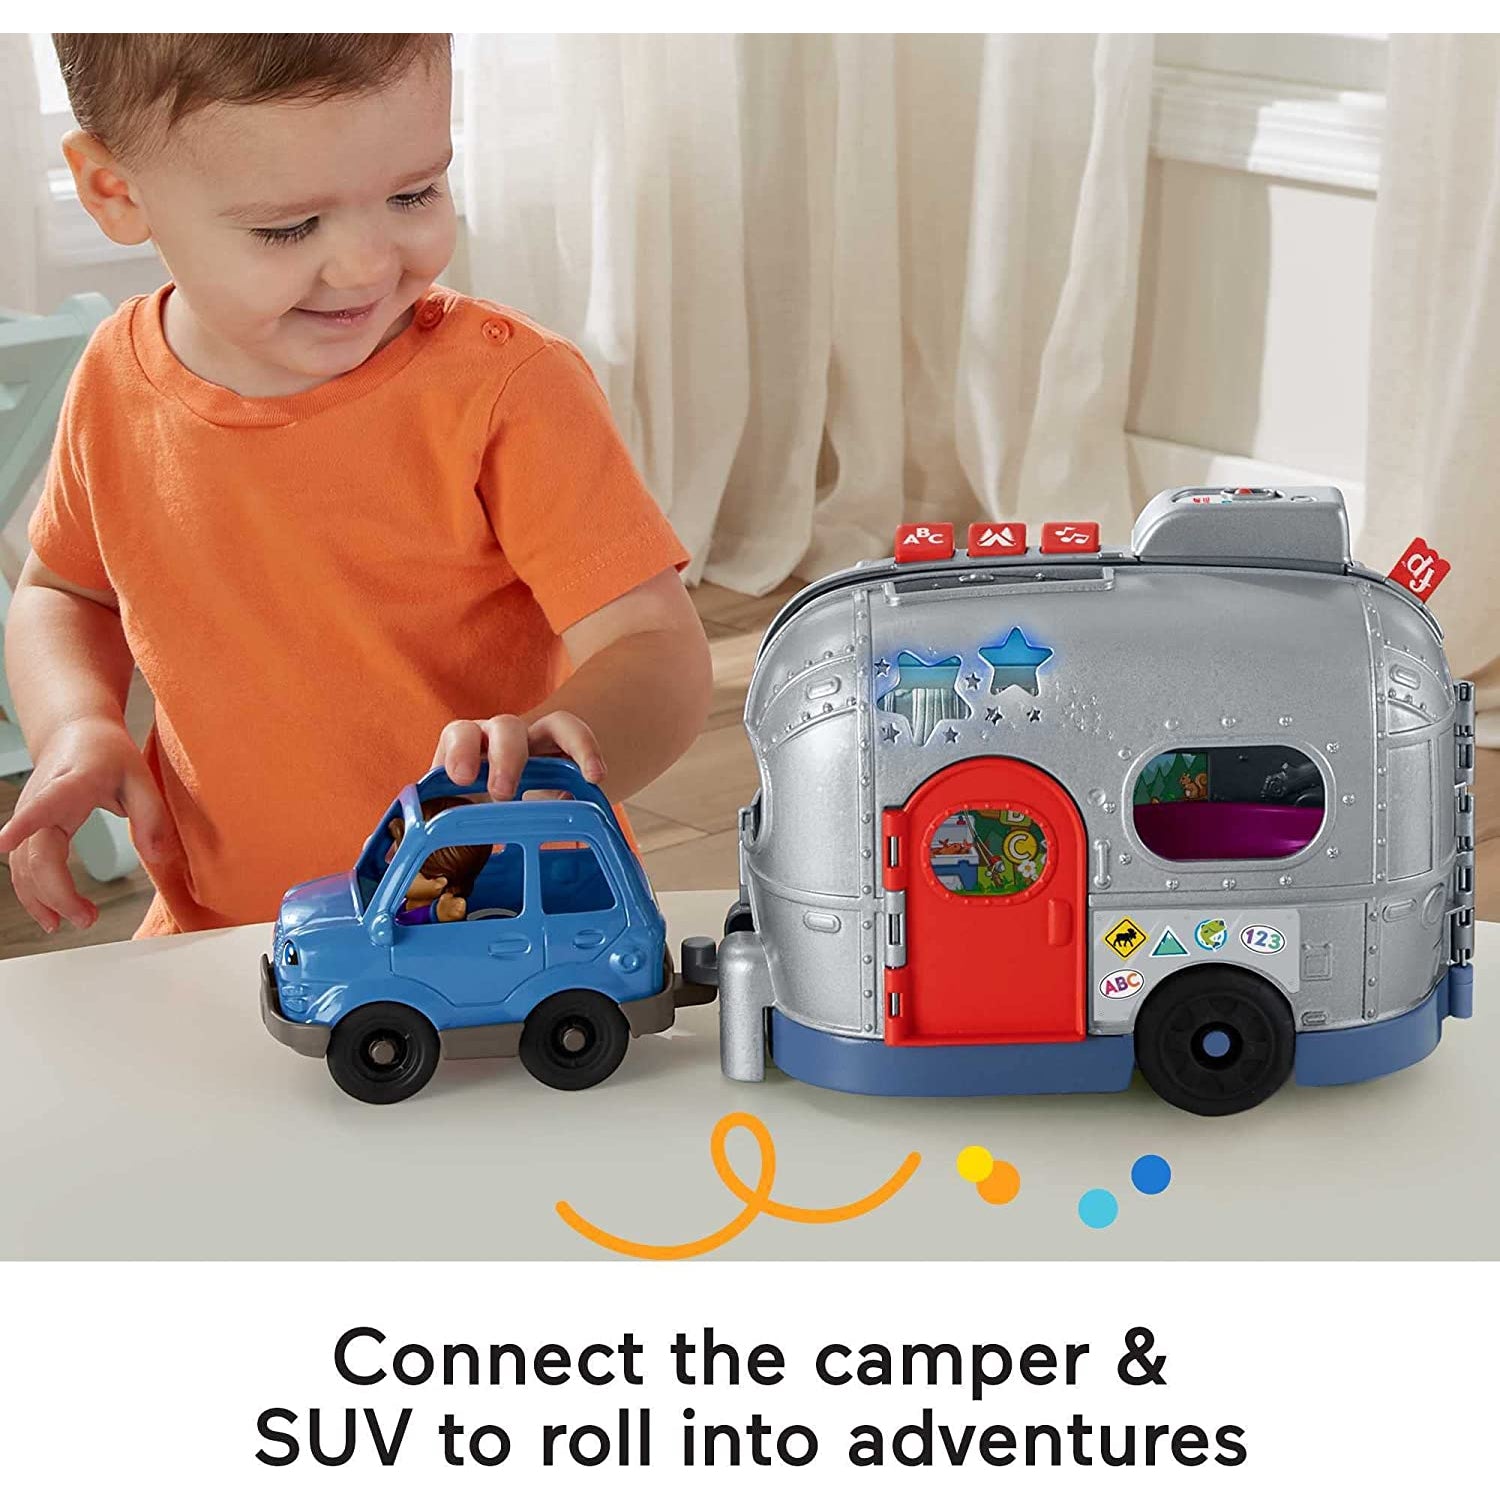 Fisher Price Little People Light-Up Learning Camper, 2-in-1 Vehicle and Interactive playset with Lig